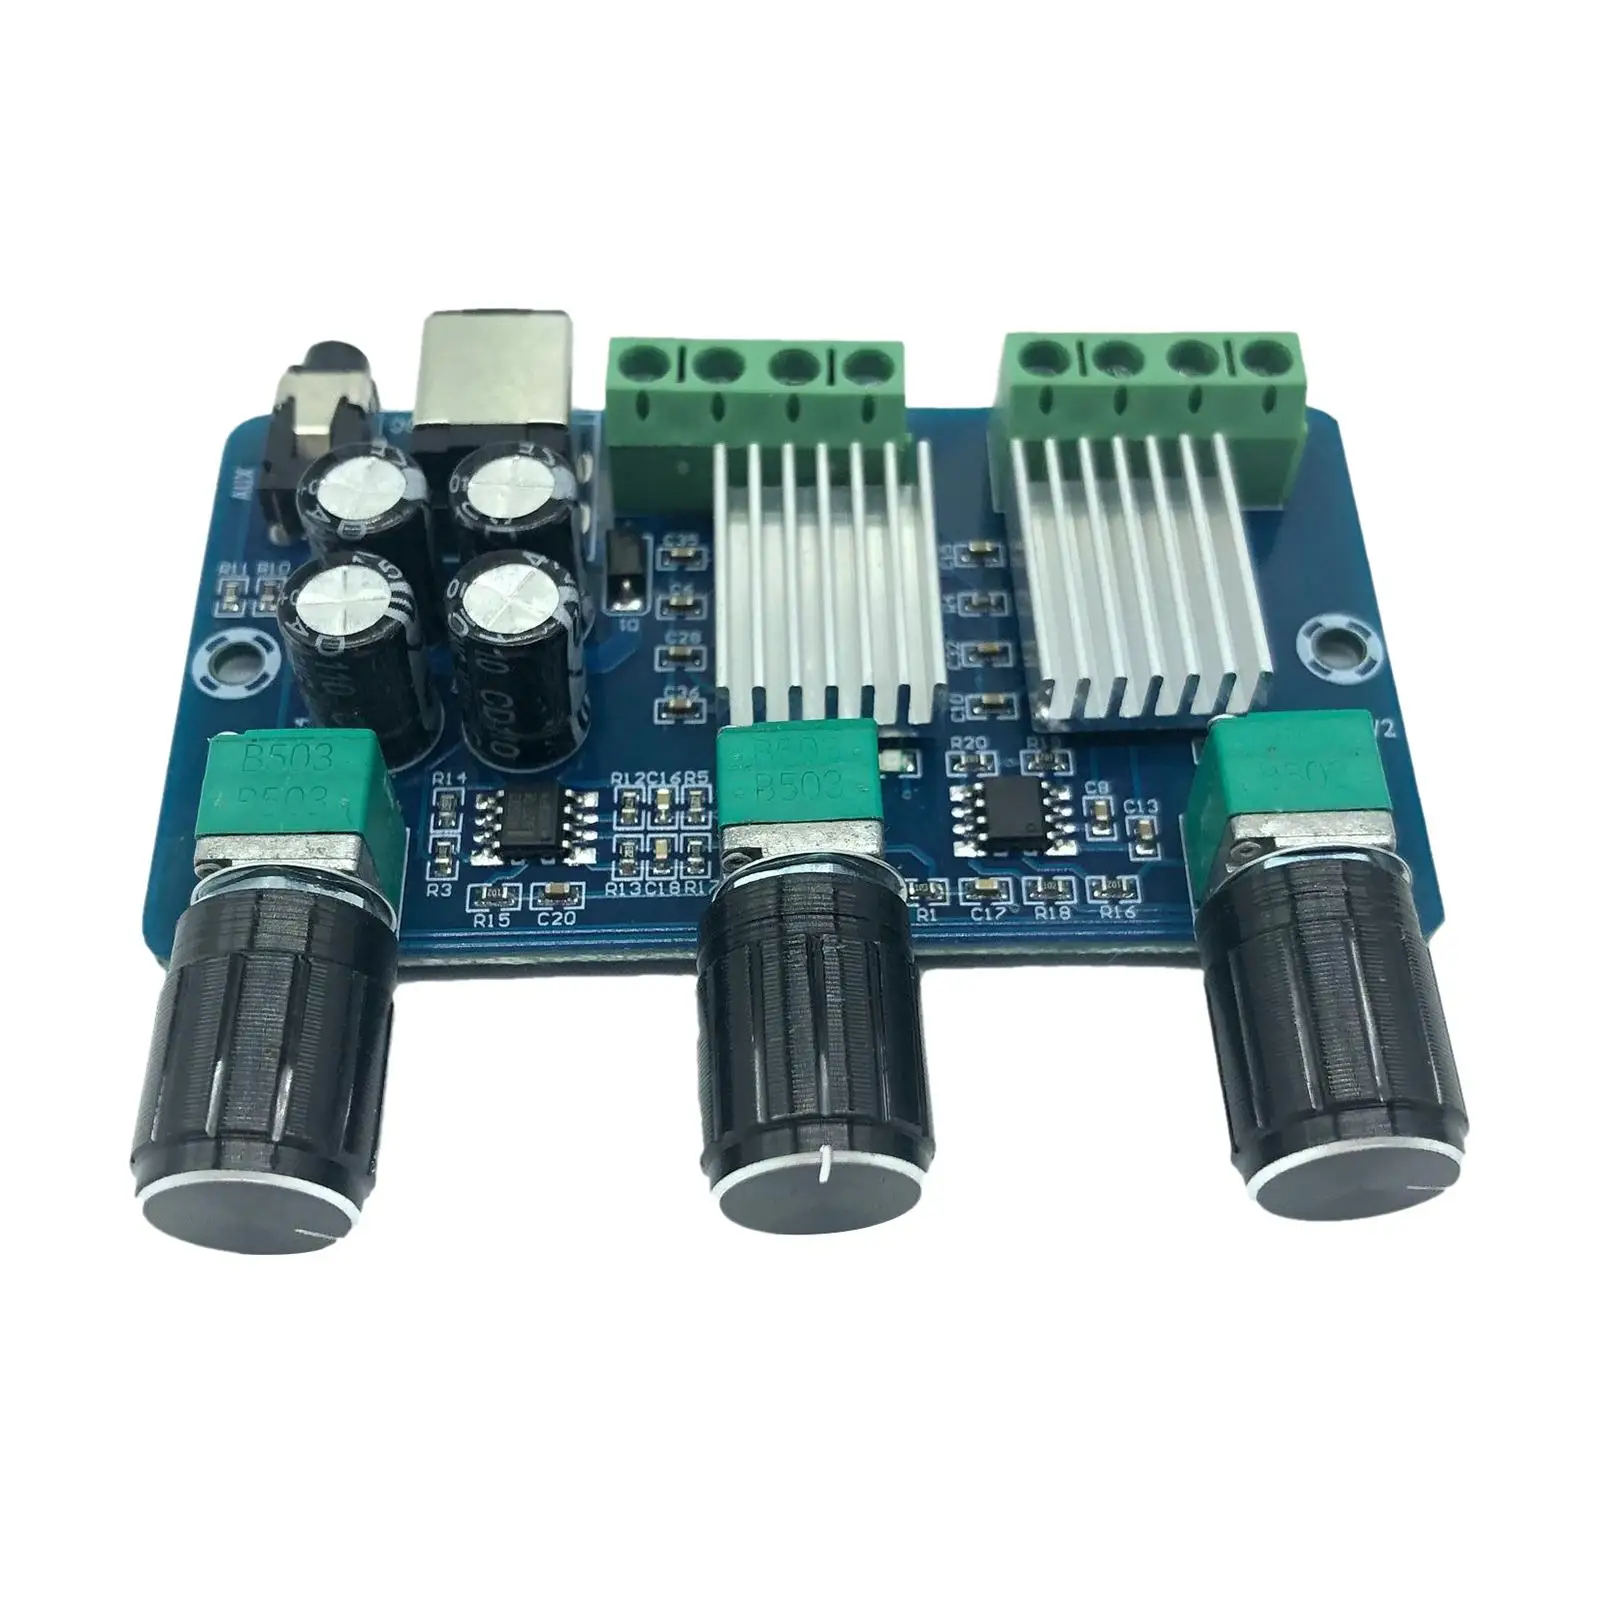 DC1A355 2.1 Channel Digital Stereo Audio Power Amplifier Board Voice Player Subwoofer AMP